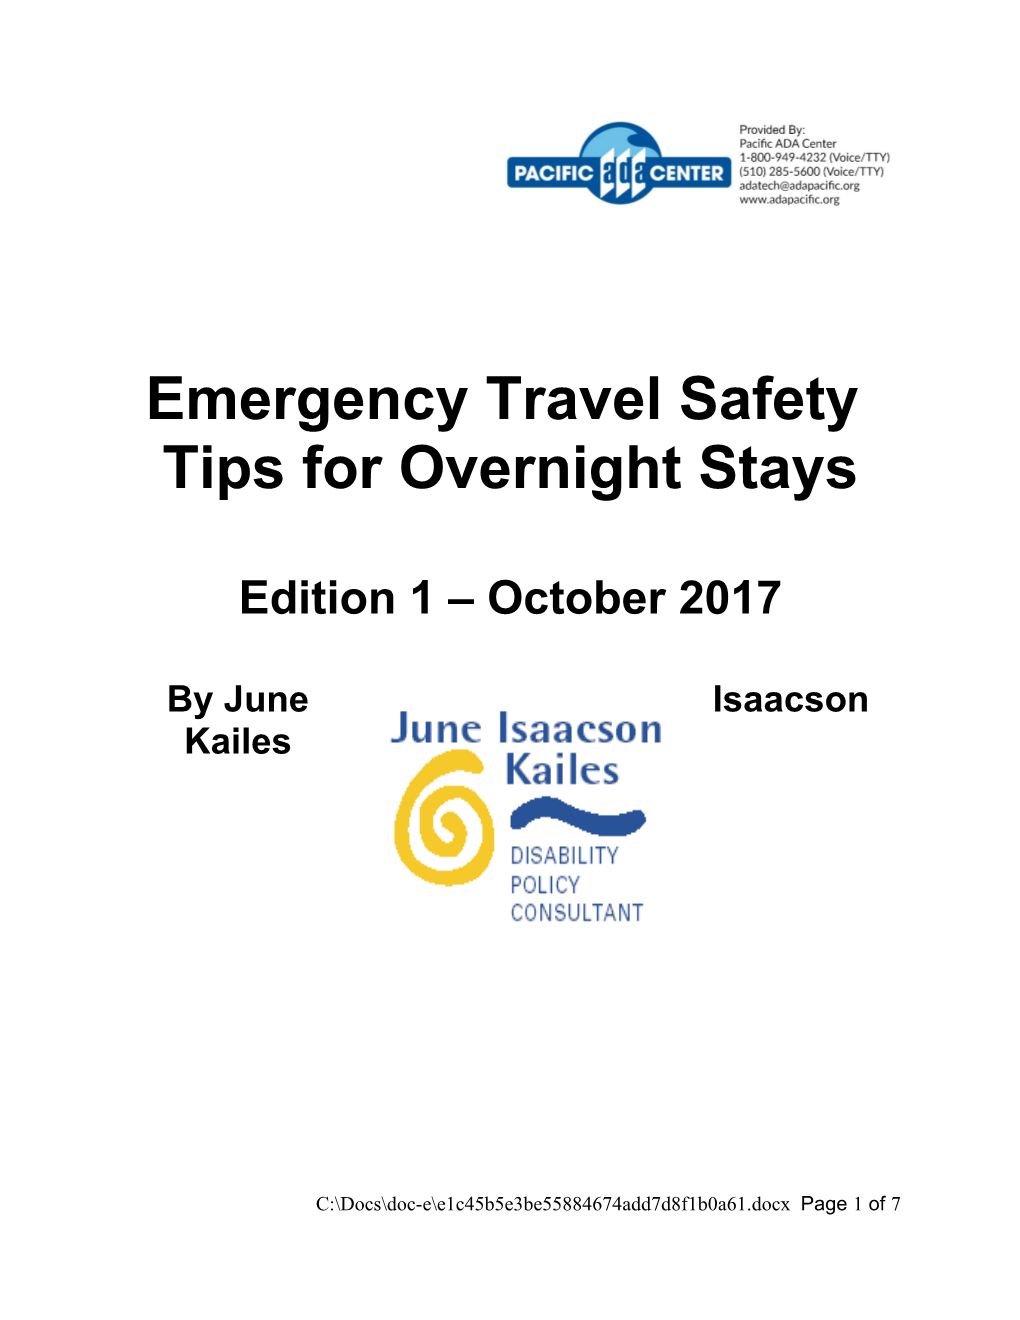 Tips for Overnight Stays